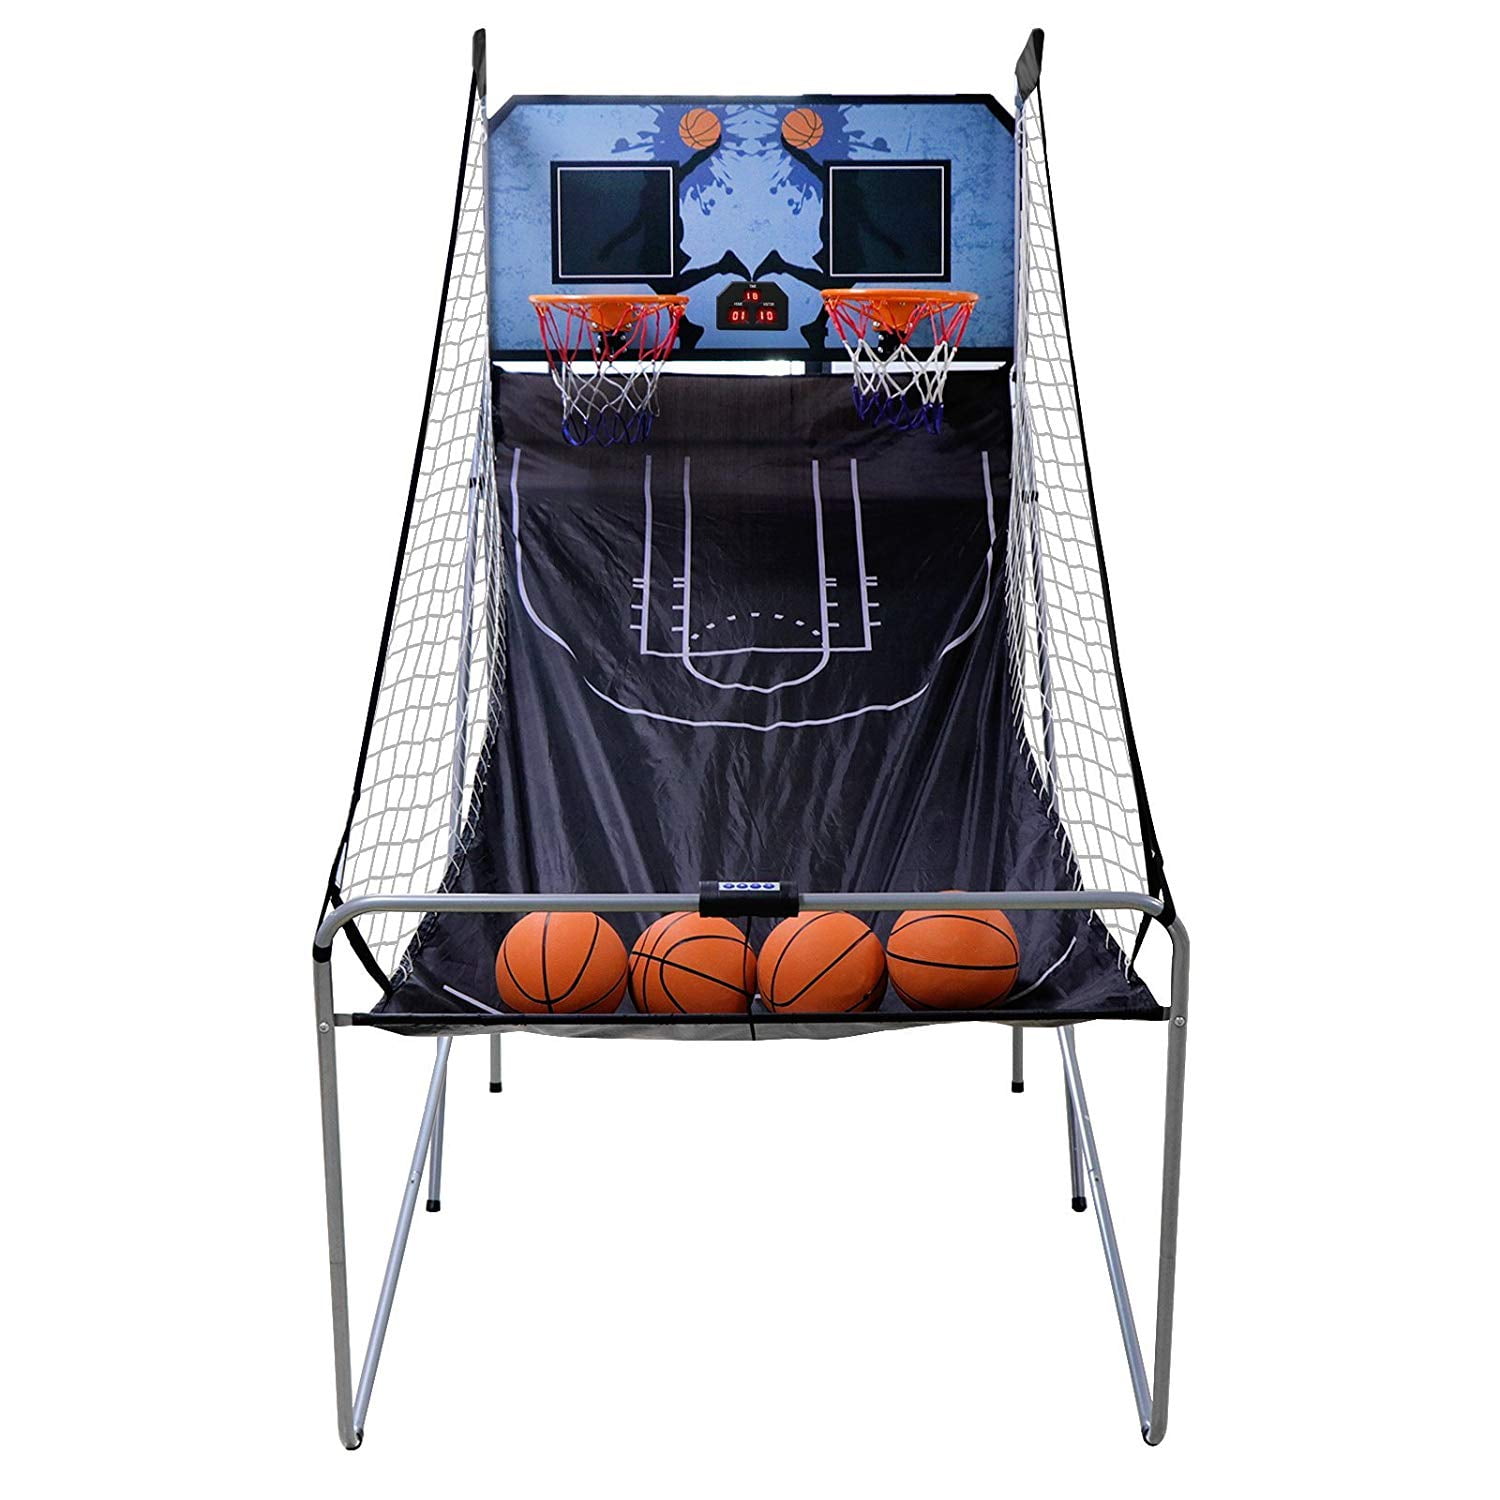 Double Shot Basketball Arcade System Heavy Duty Fold Up Design Home Sports Game 